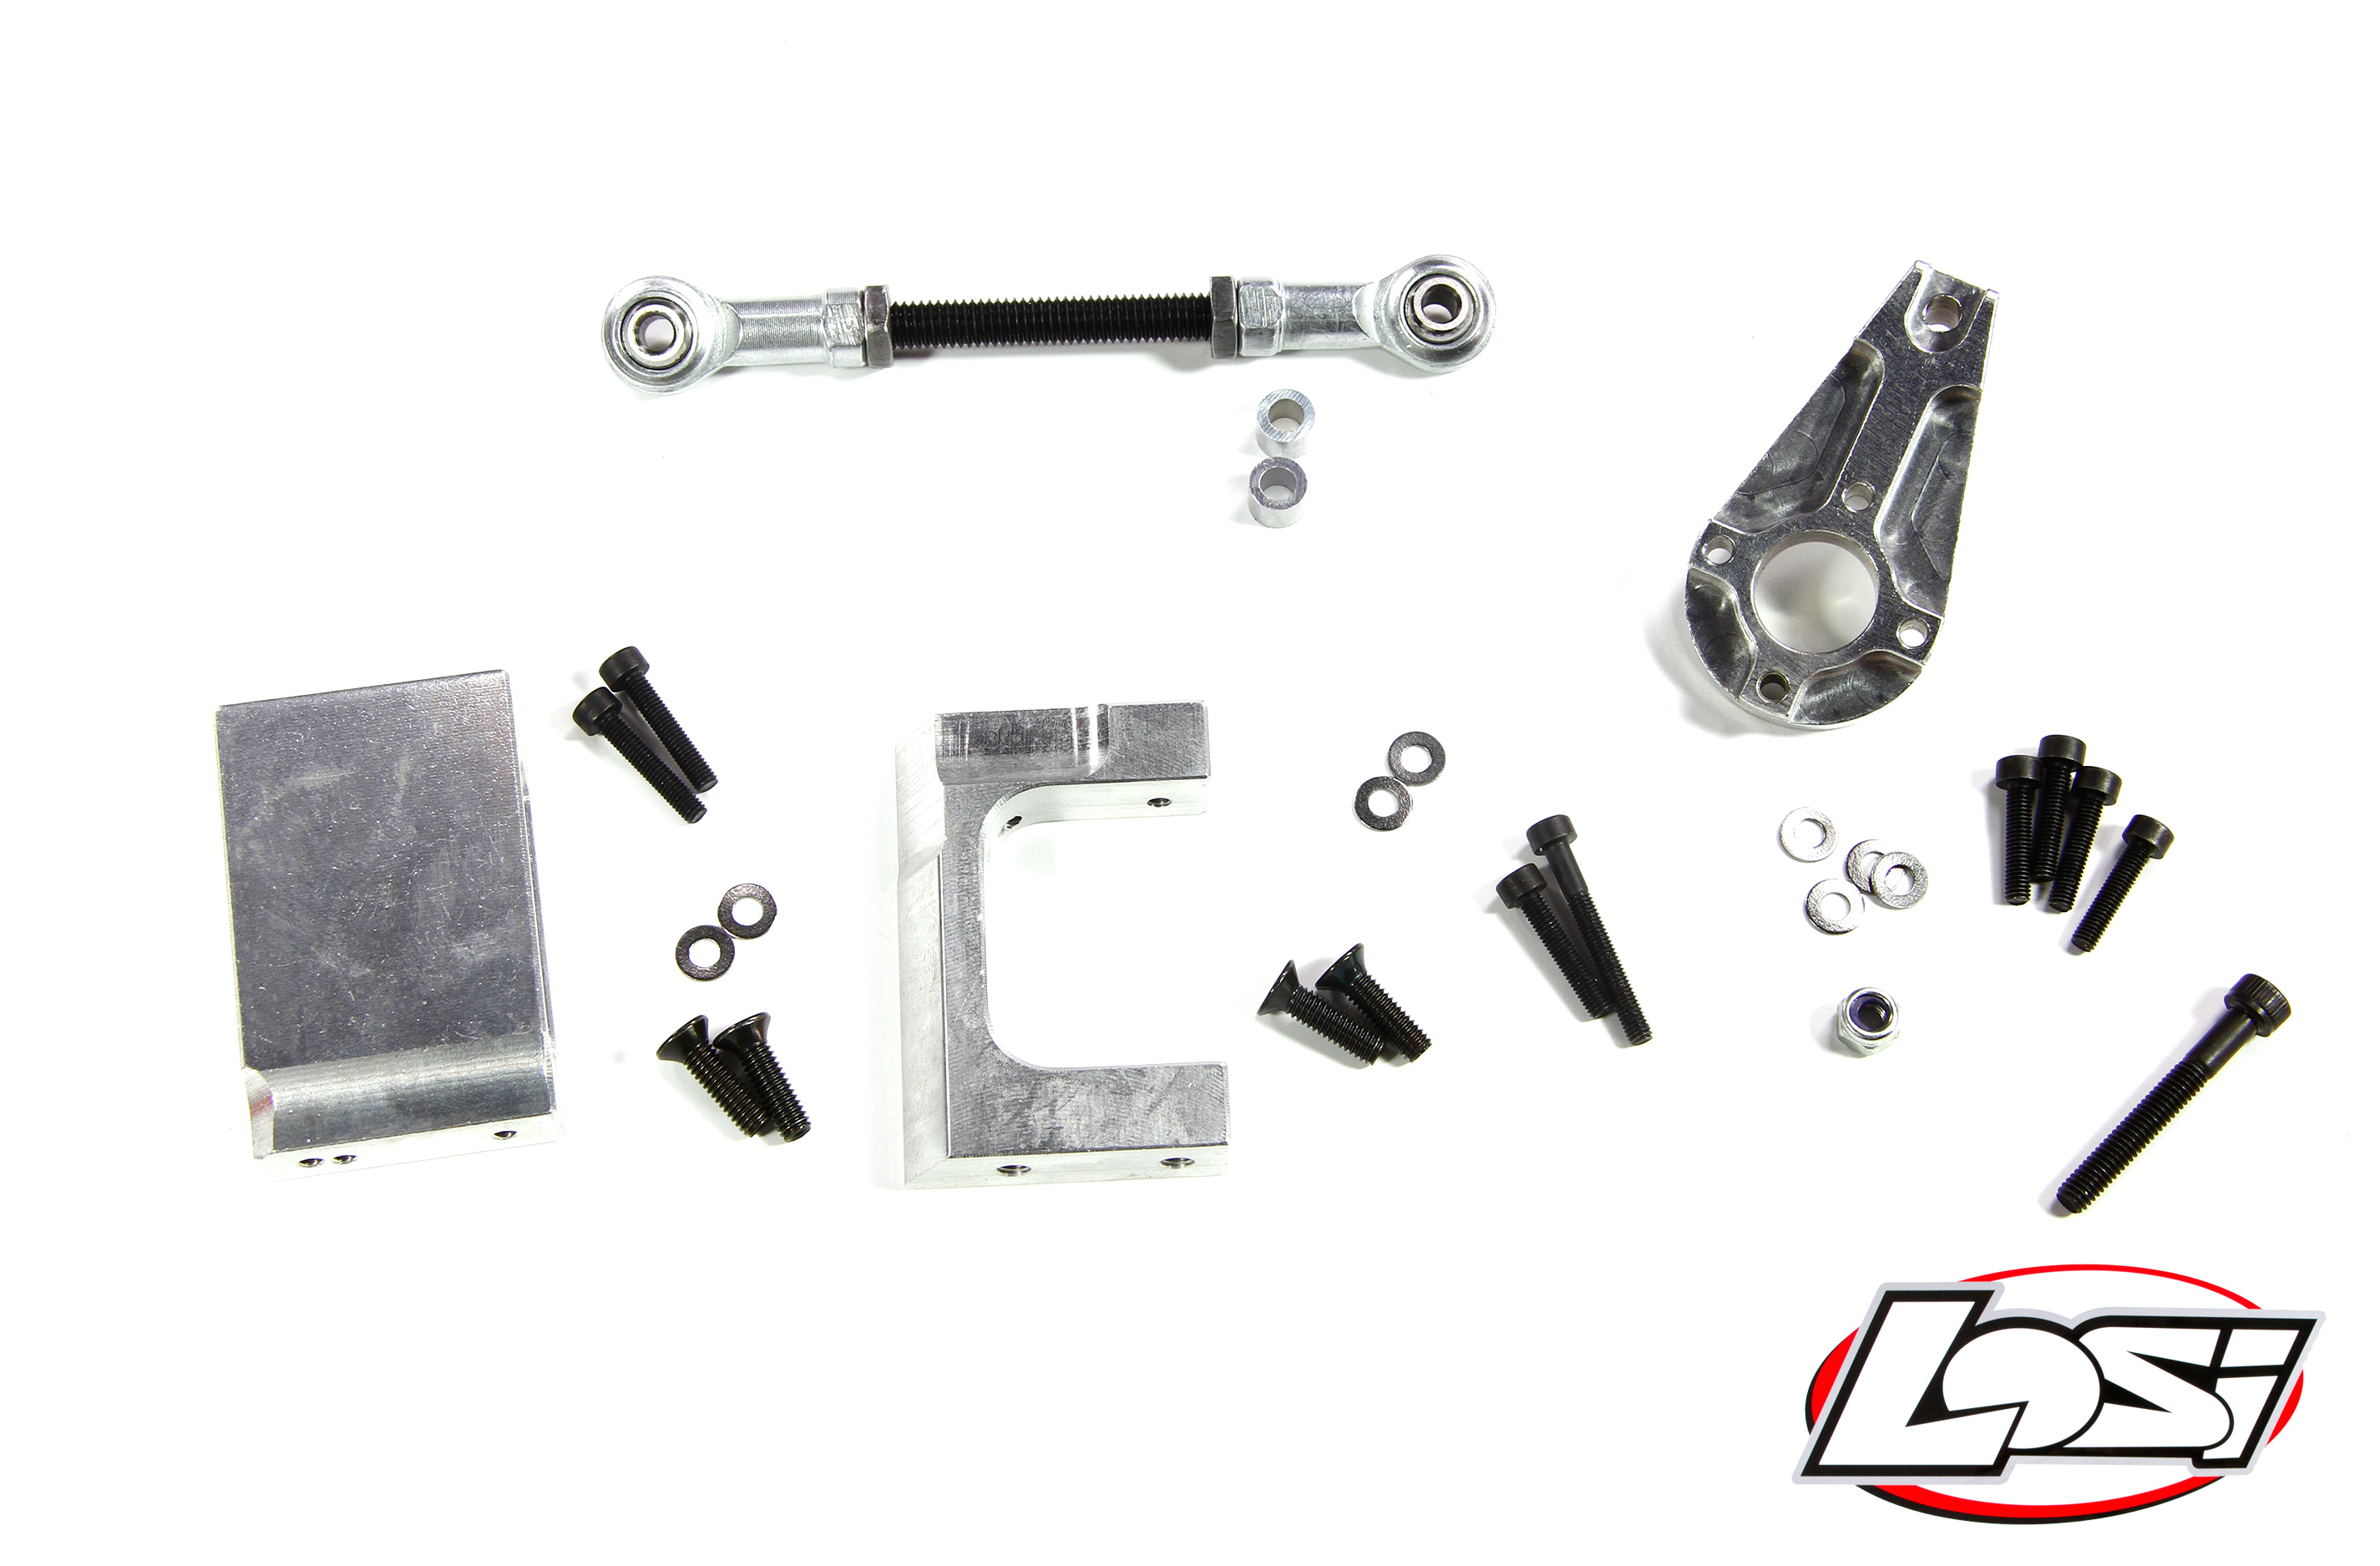 y1310 Hitec HS-1005SGT/HS-1100WP small mounting set for Losi 5ive-T, 2.0, 5ive-B and Mini